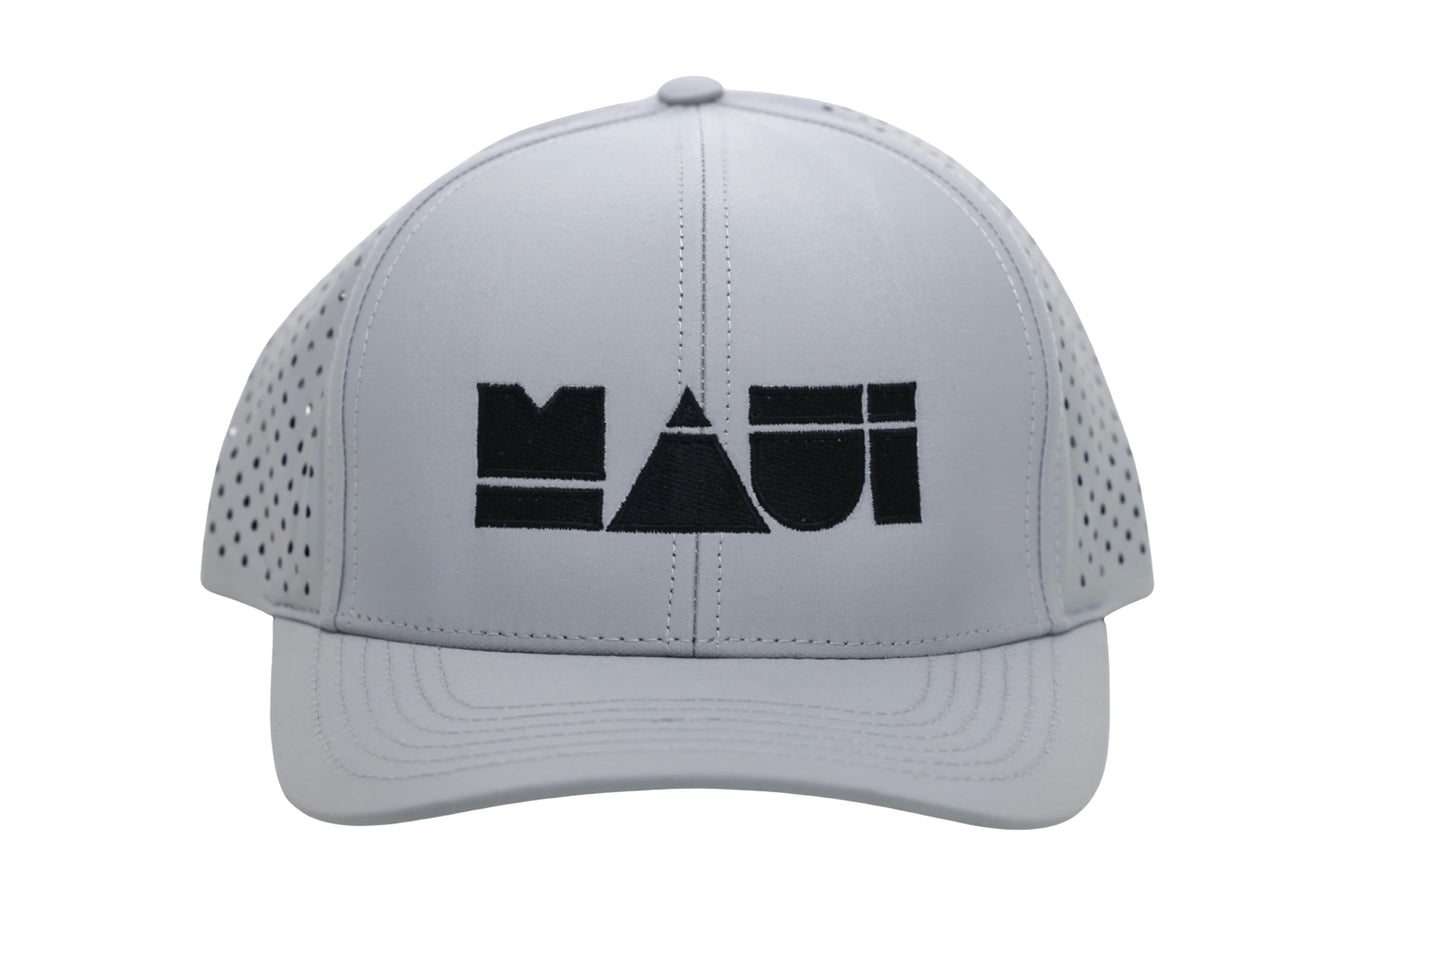 GOING GREY Adult Curved Bill Snapback